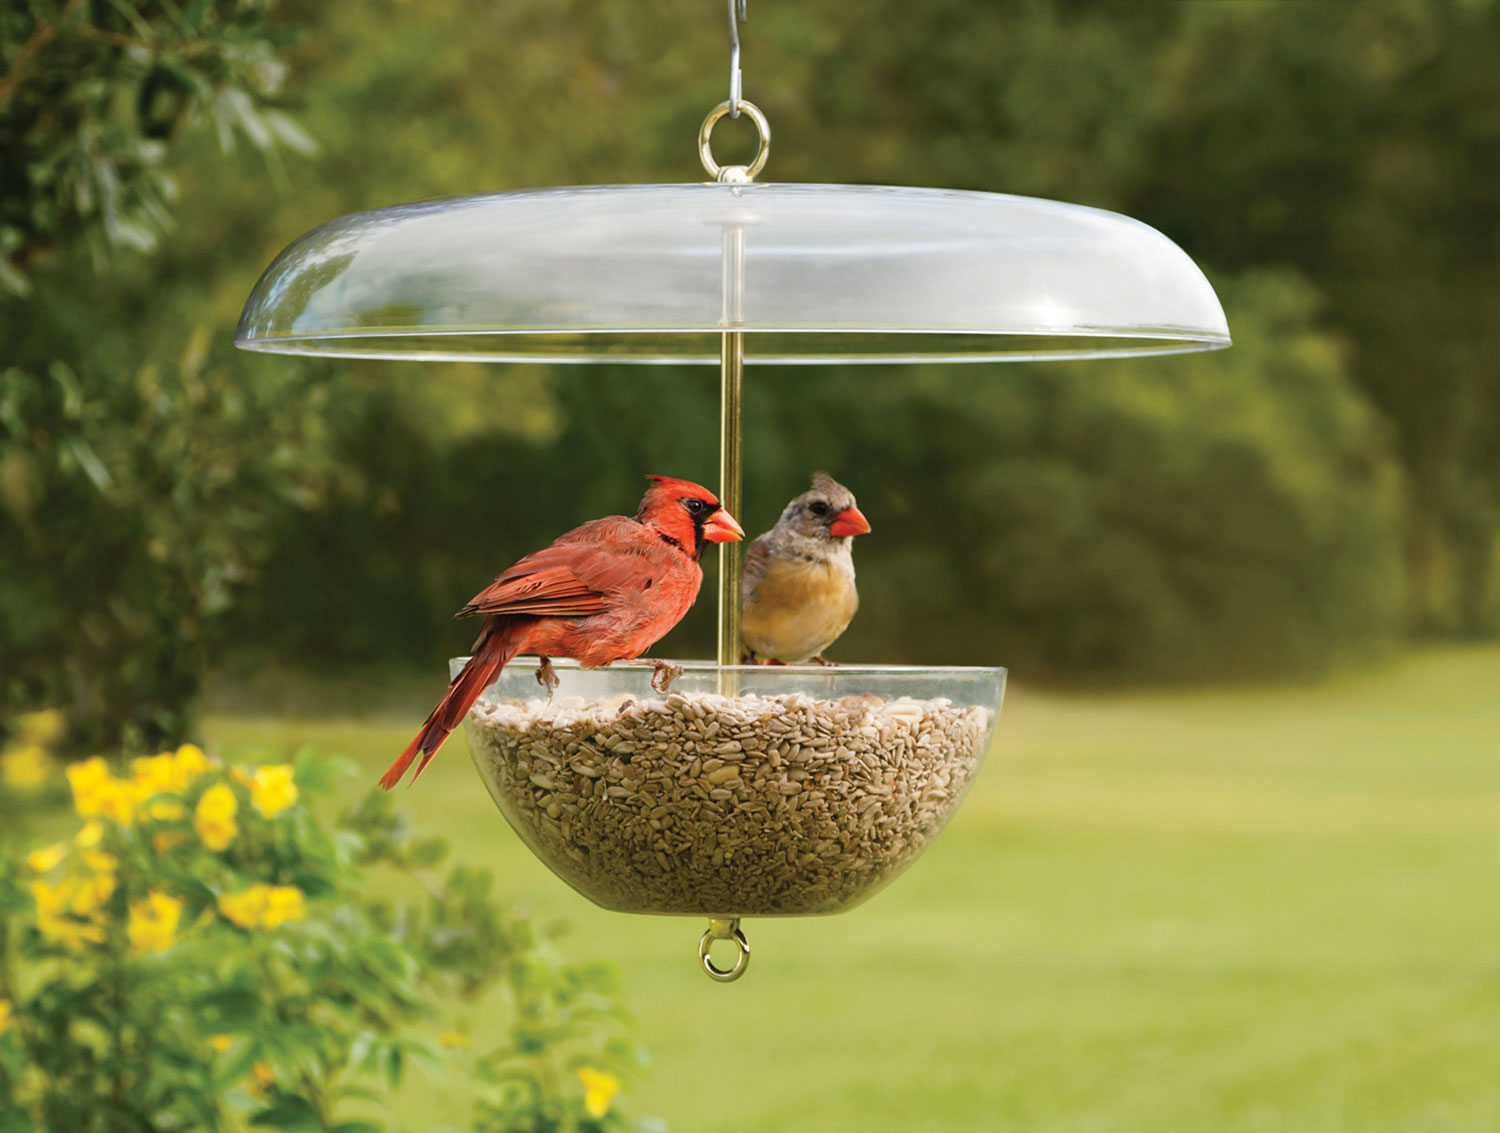 feeders How to attract cardinals in your house's backyard (Great tips)